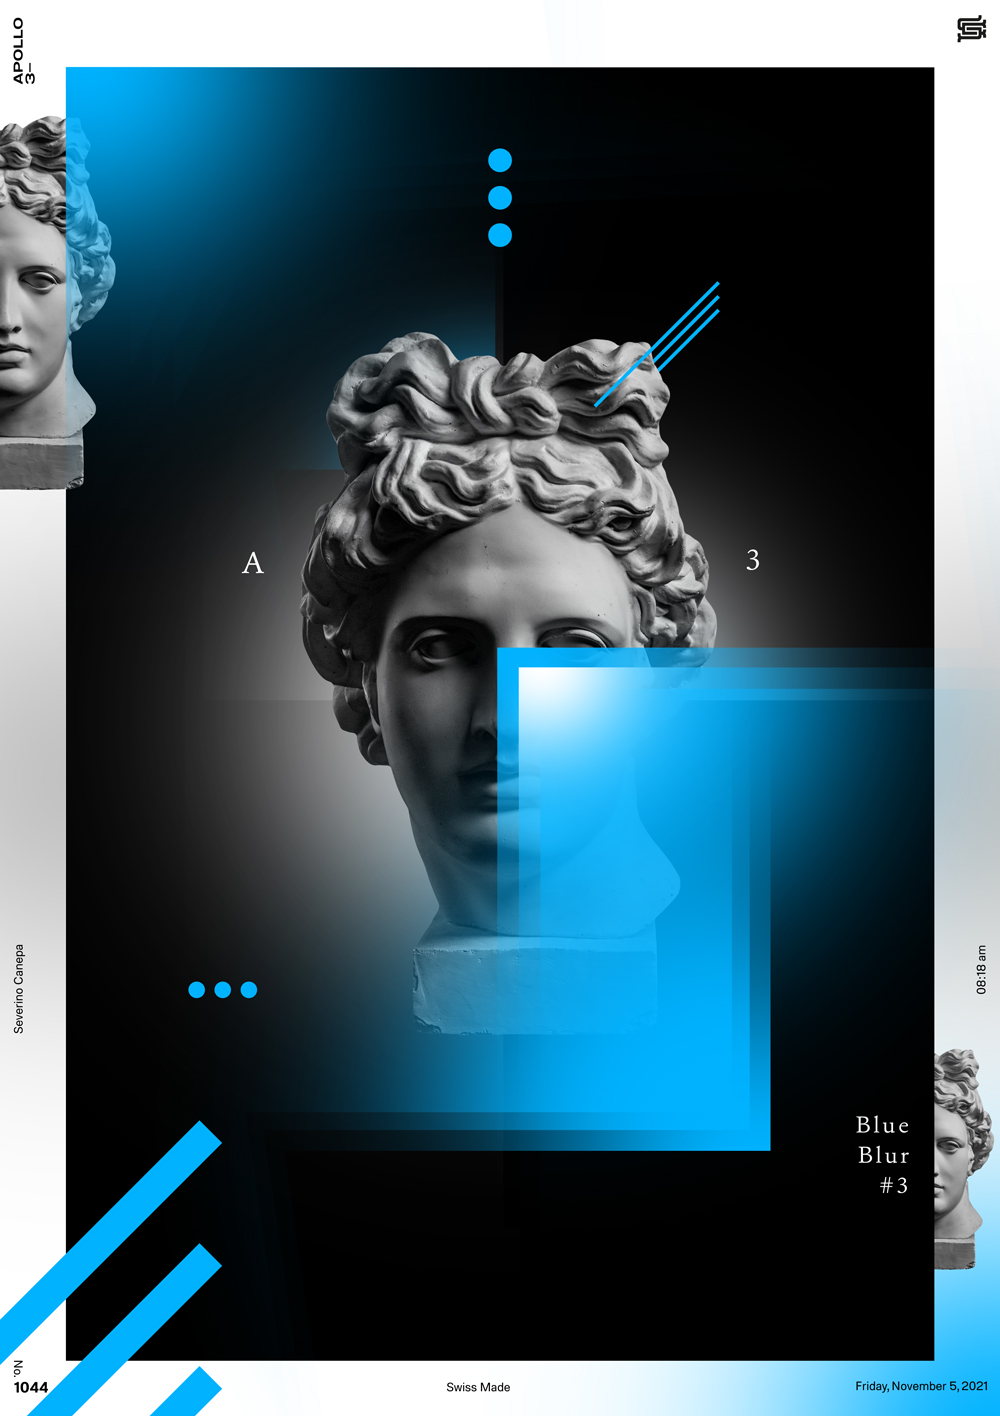 New visual and creative design made in Photoshop with Apollo's Statue